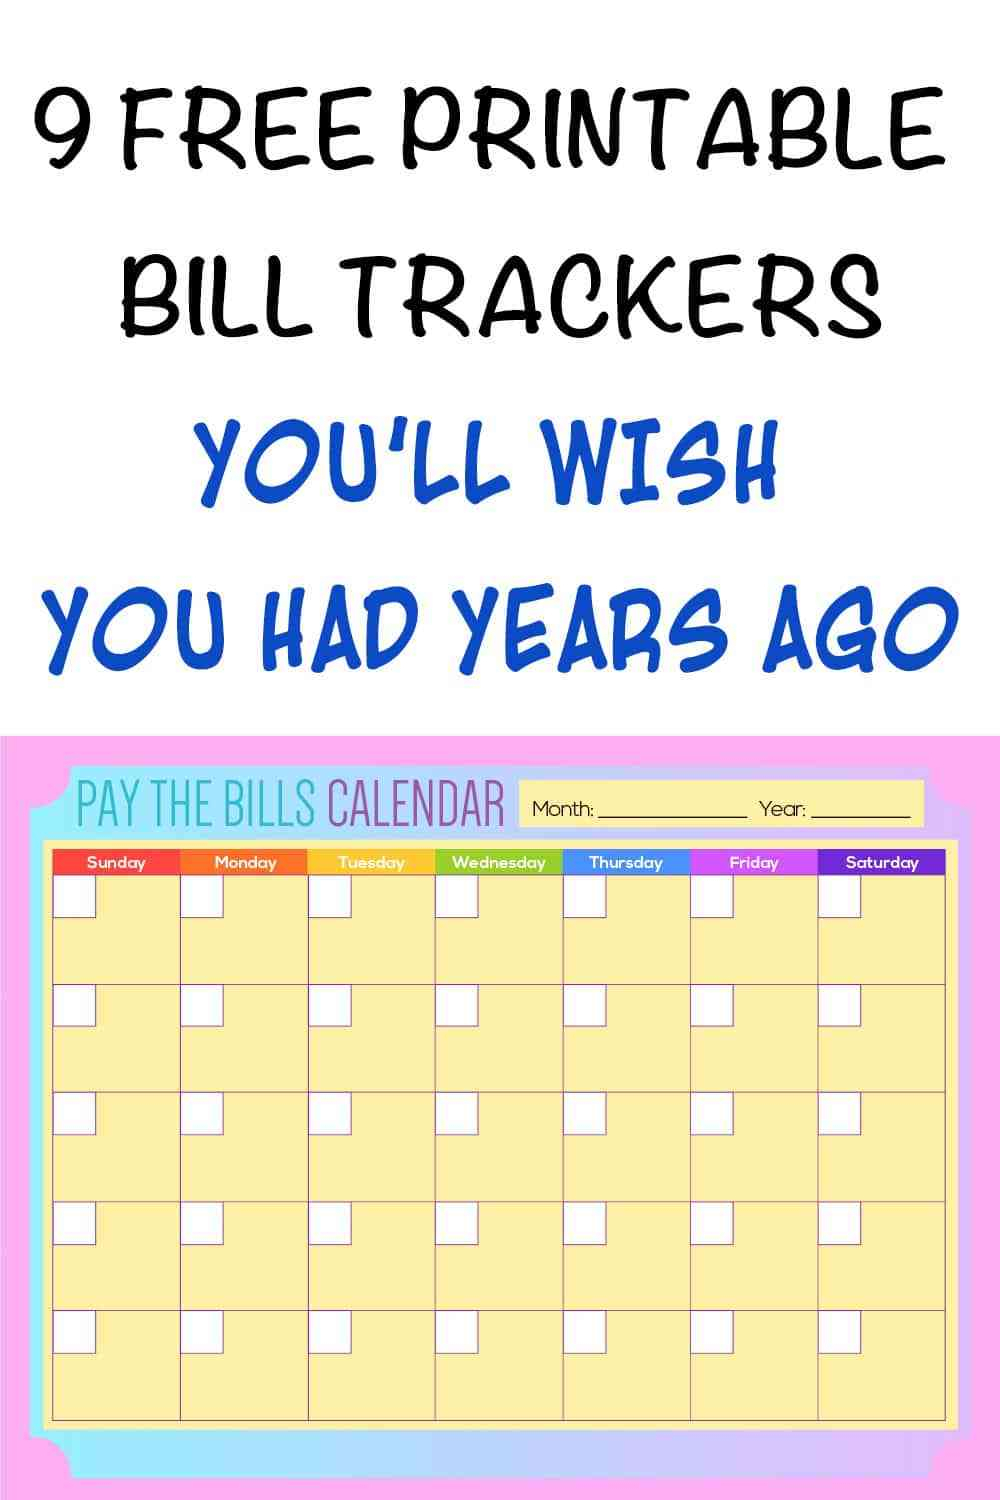 9 Printable Bill Payment Checklists And Bill Trackers - The